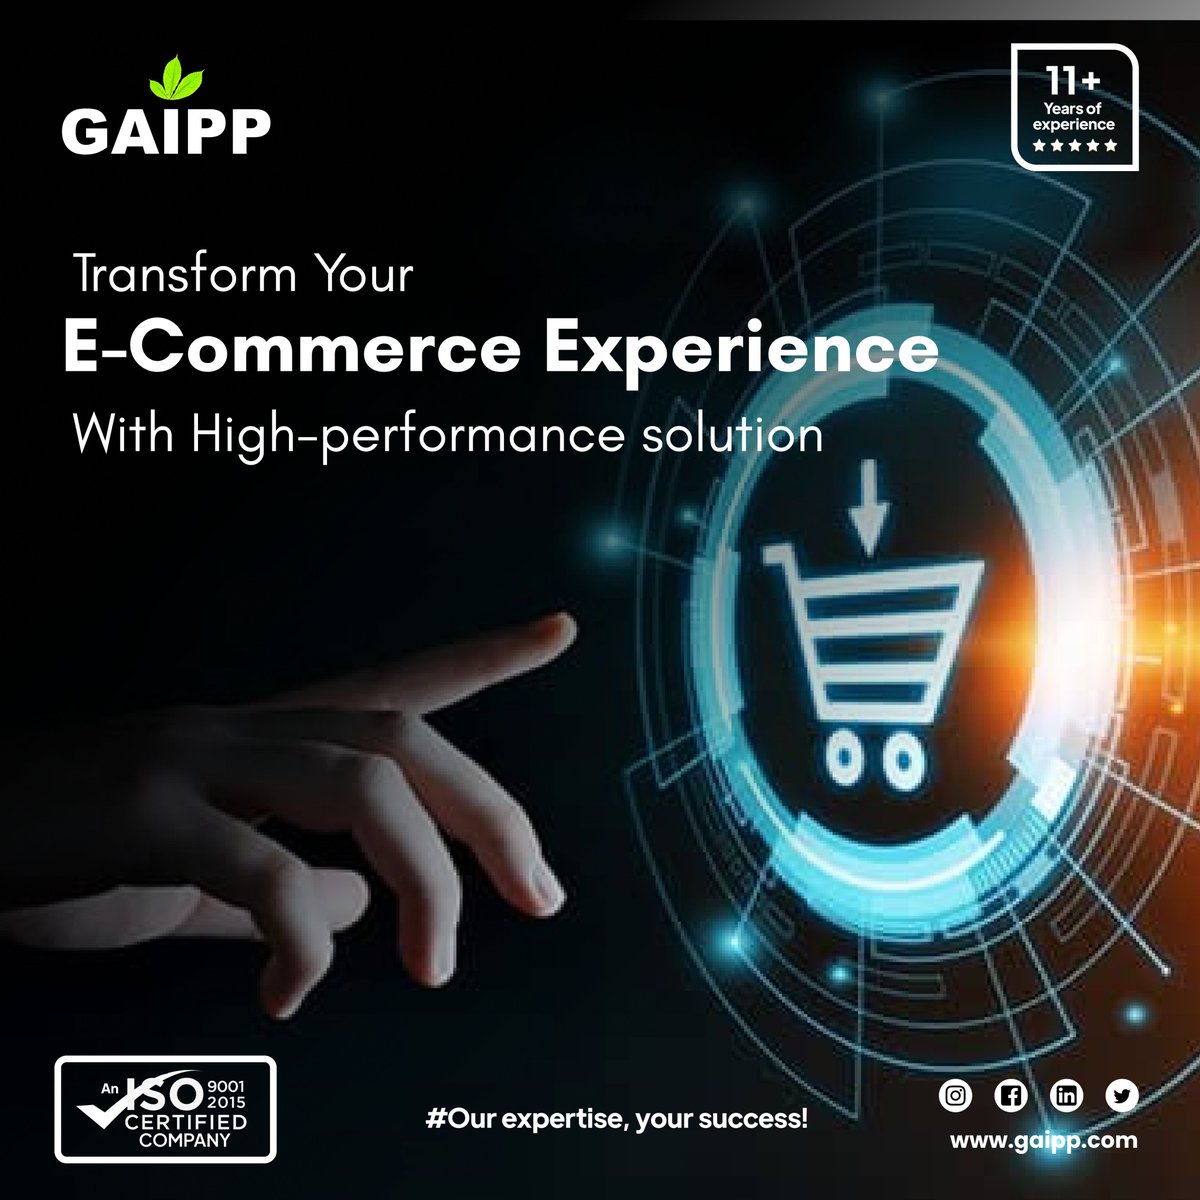 Revolutionize your online business with our cutting-edge eCommerce solutions

#eCommerce #OnlineRetail #BusinessSolutions #ecommercebusiness #gaipp #digitalmarketing #digitalmarketingservices